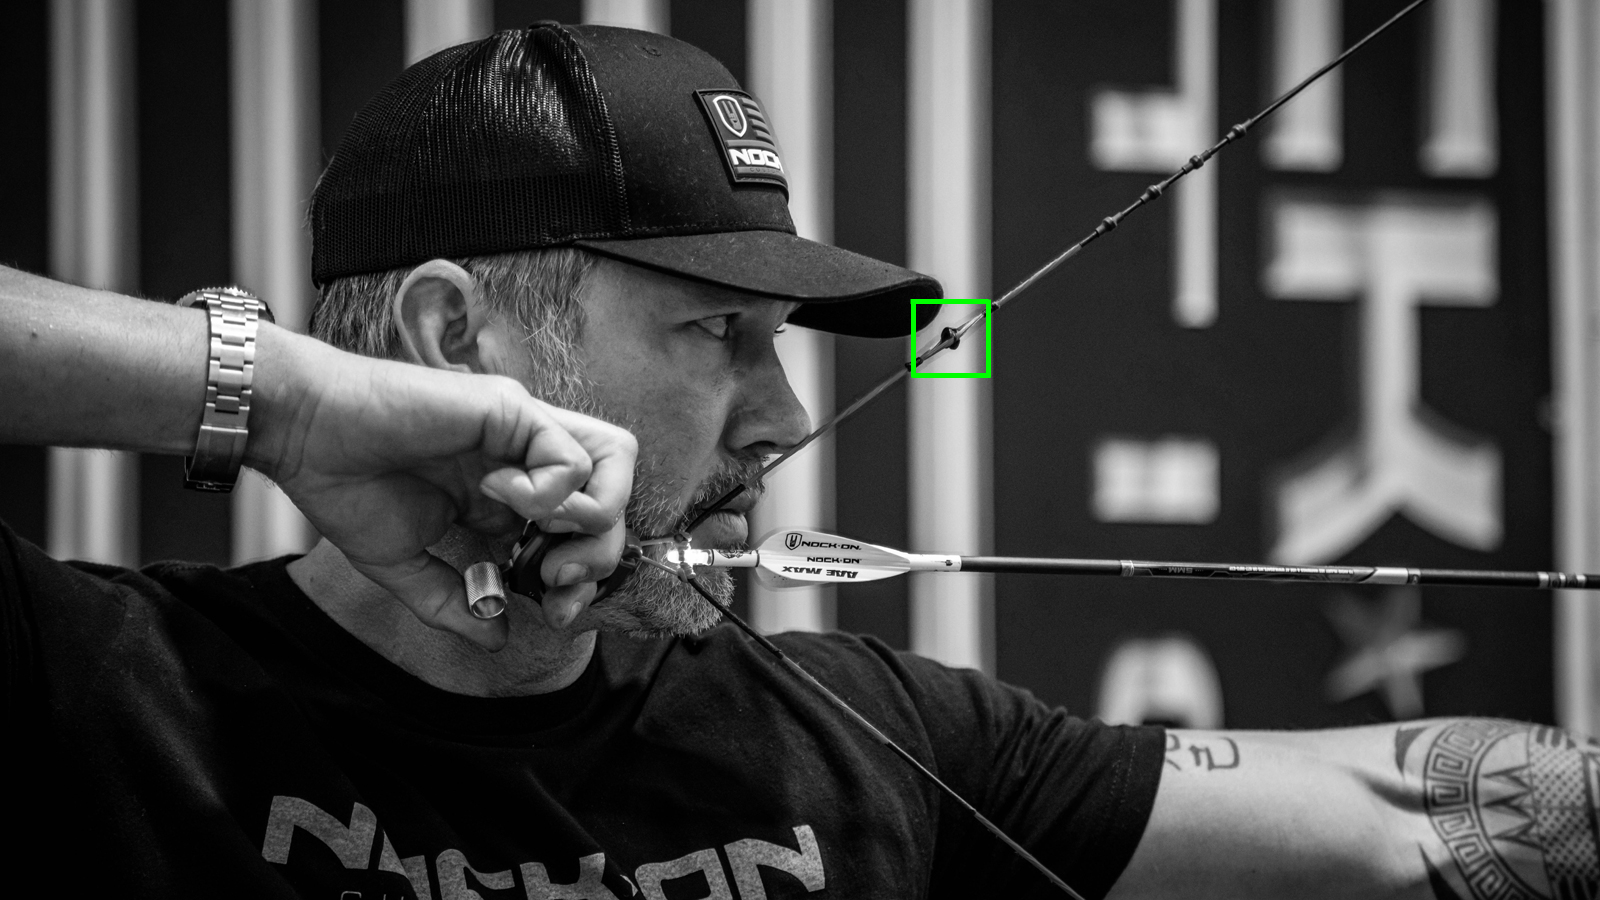 IS YOUR PEEP SIGHT IN THE RIGHT LOCATION?